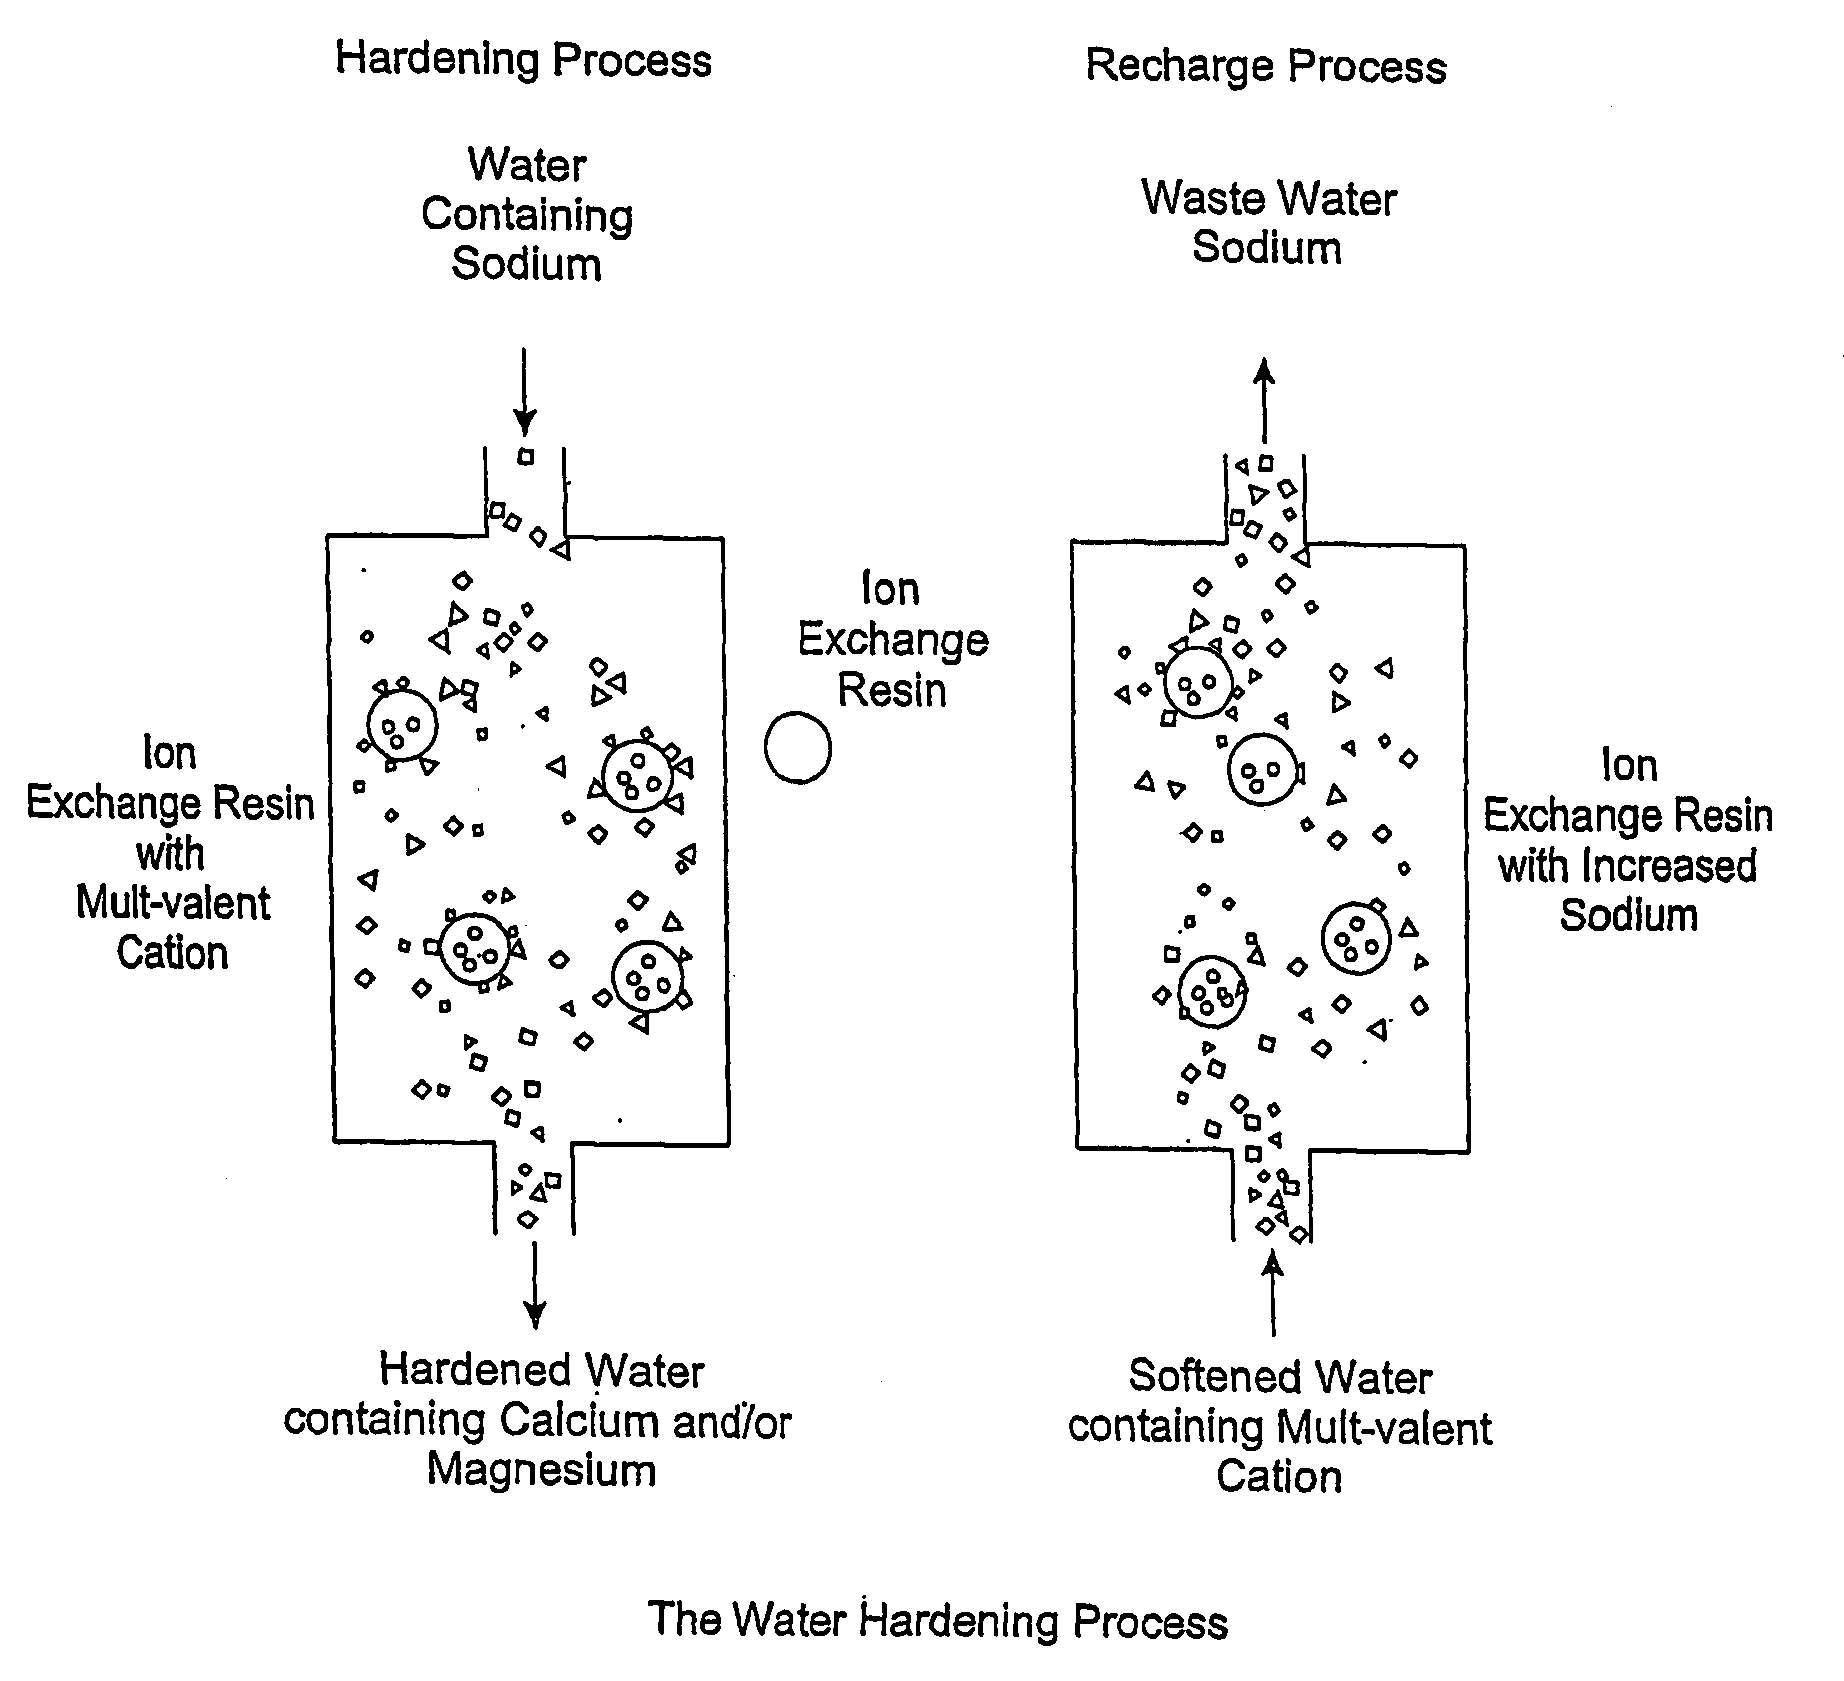 Methods of Utilizing Waste Waters Produced by Water Purification Processing